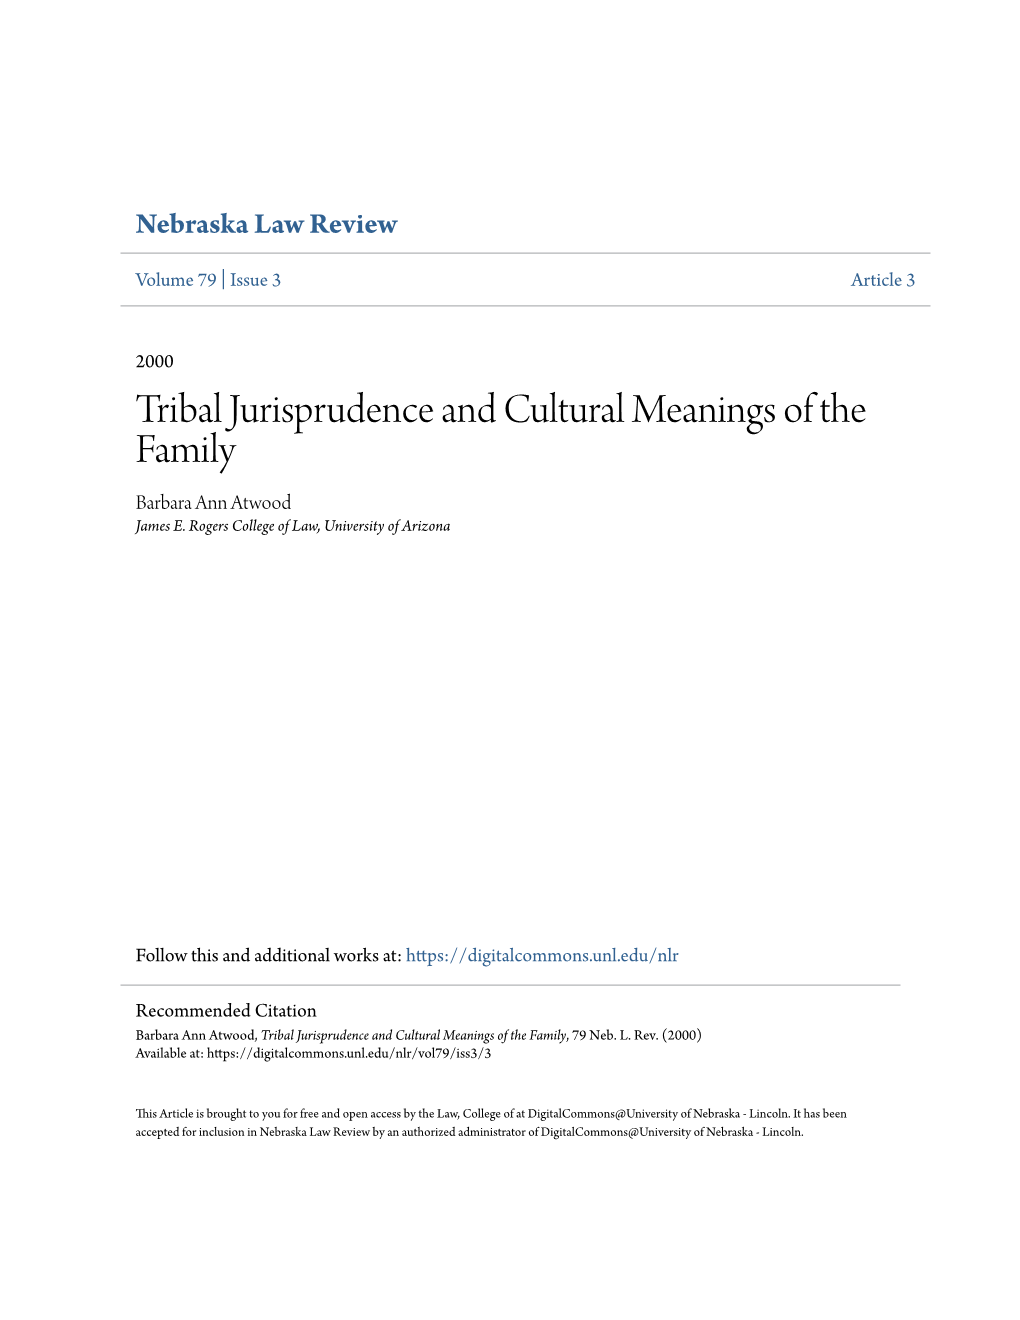 Tribal Jurisprudence and Cultural Meanings of the Family Barbara Ann Atwood James E